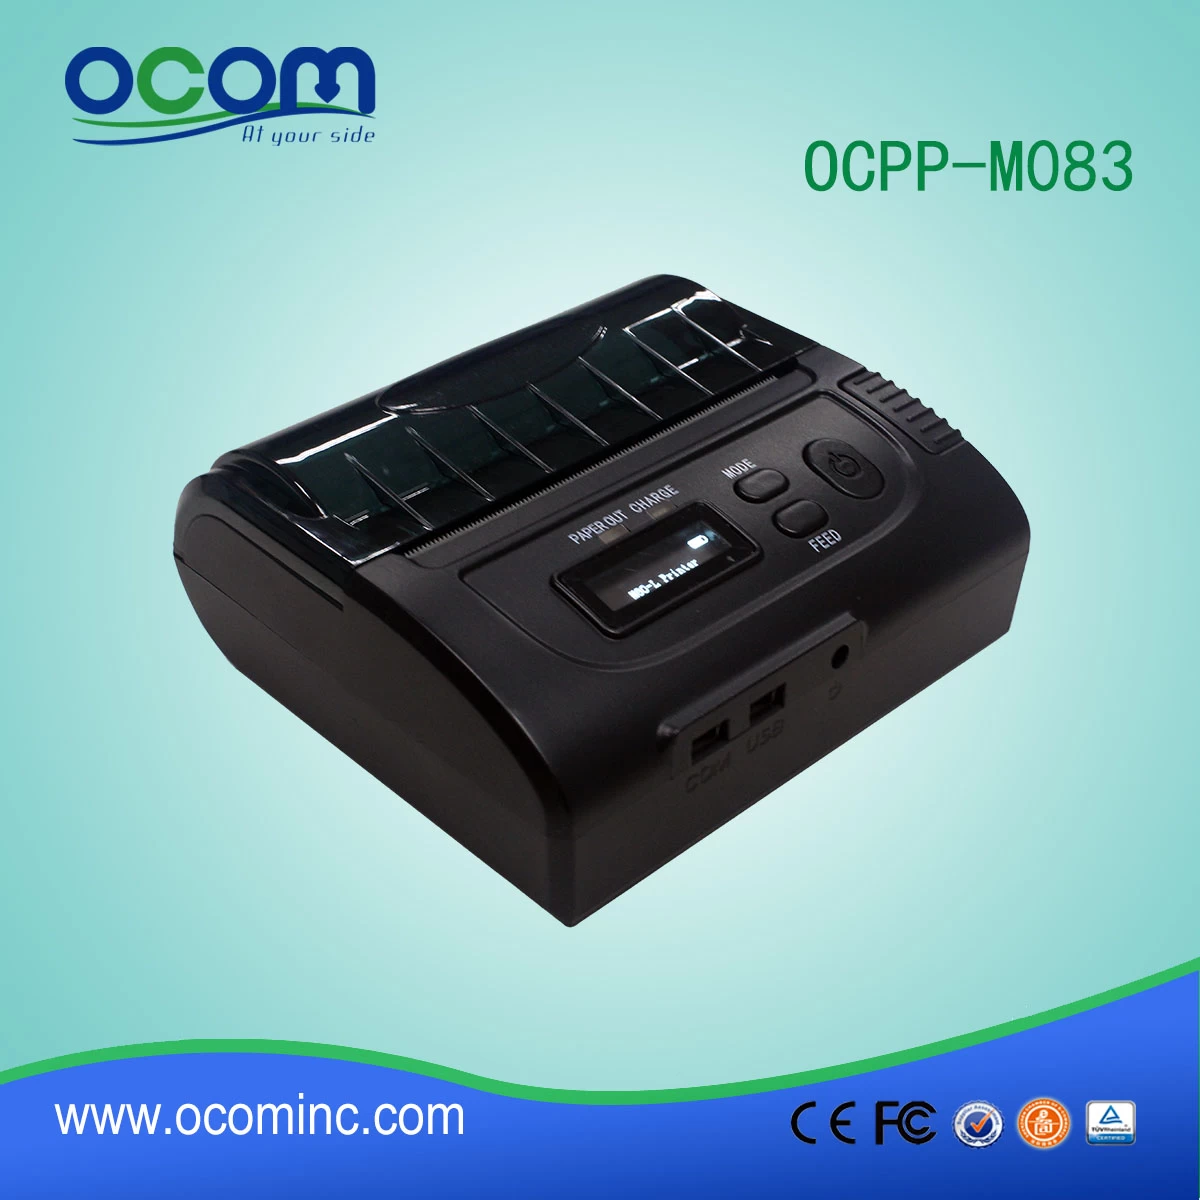 OCPP-M083 2016 New product 80mm bluetooth mobile thermal printer